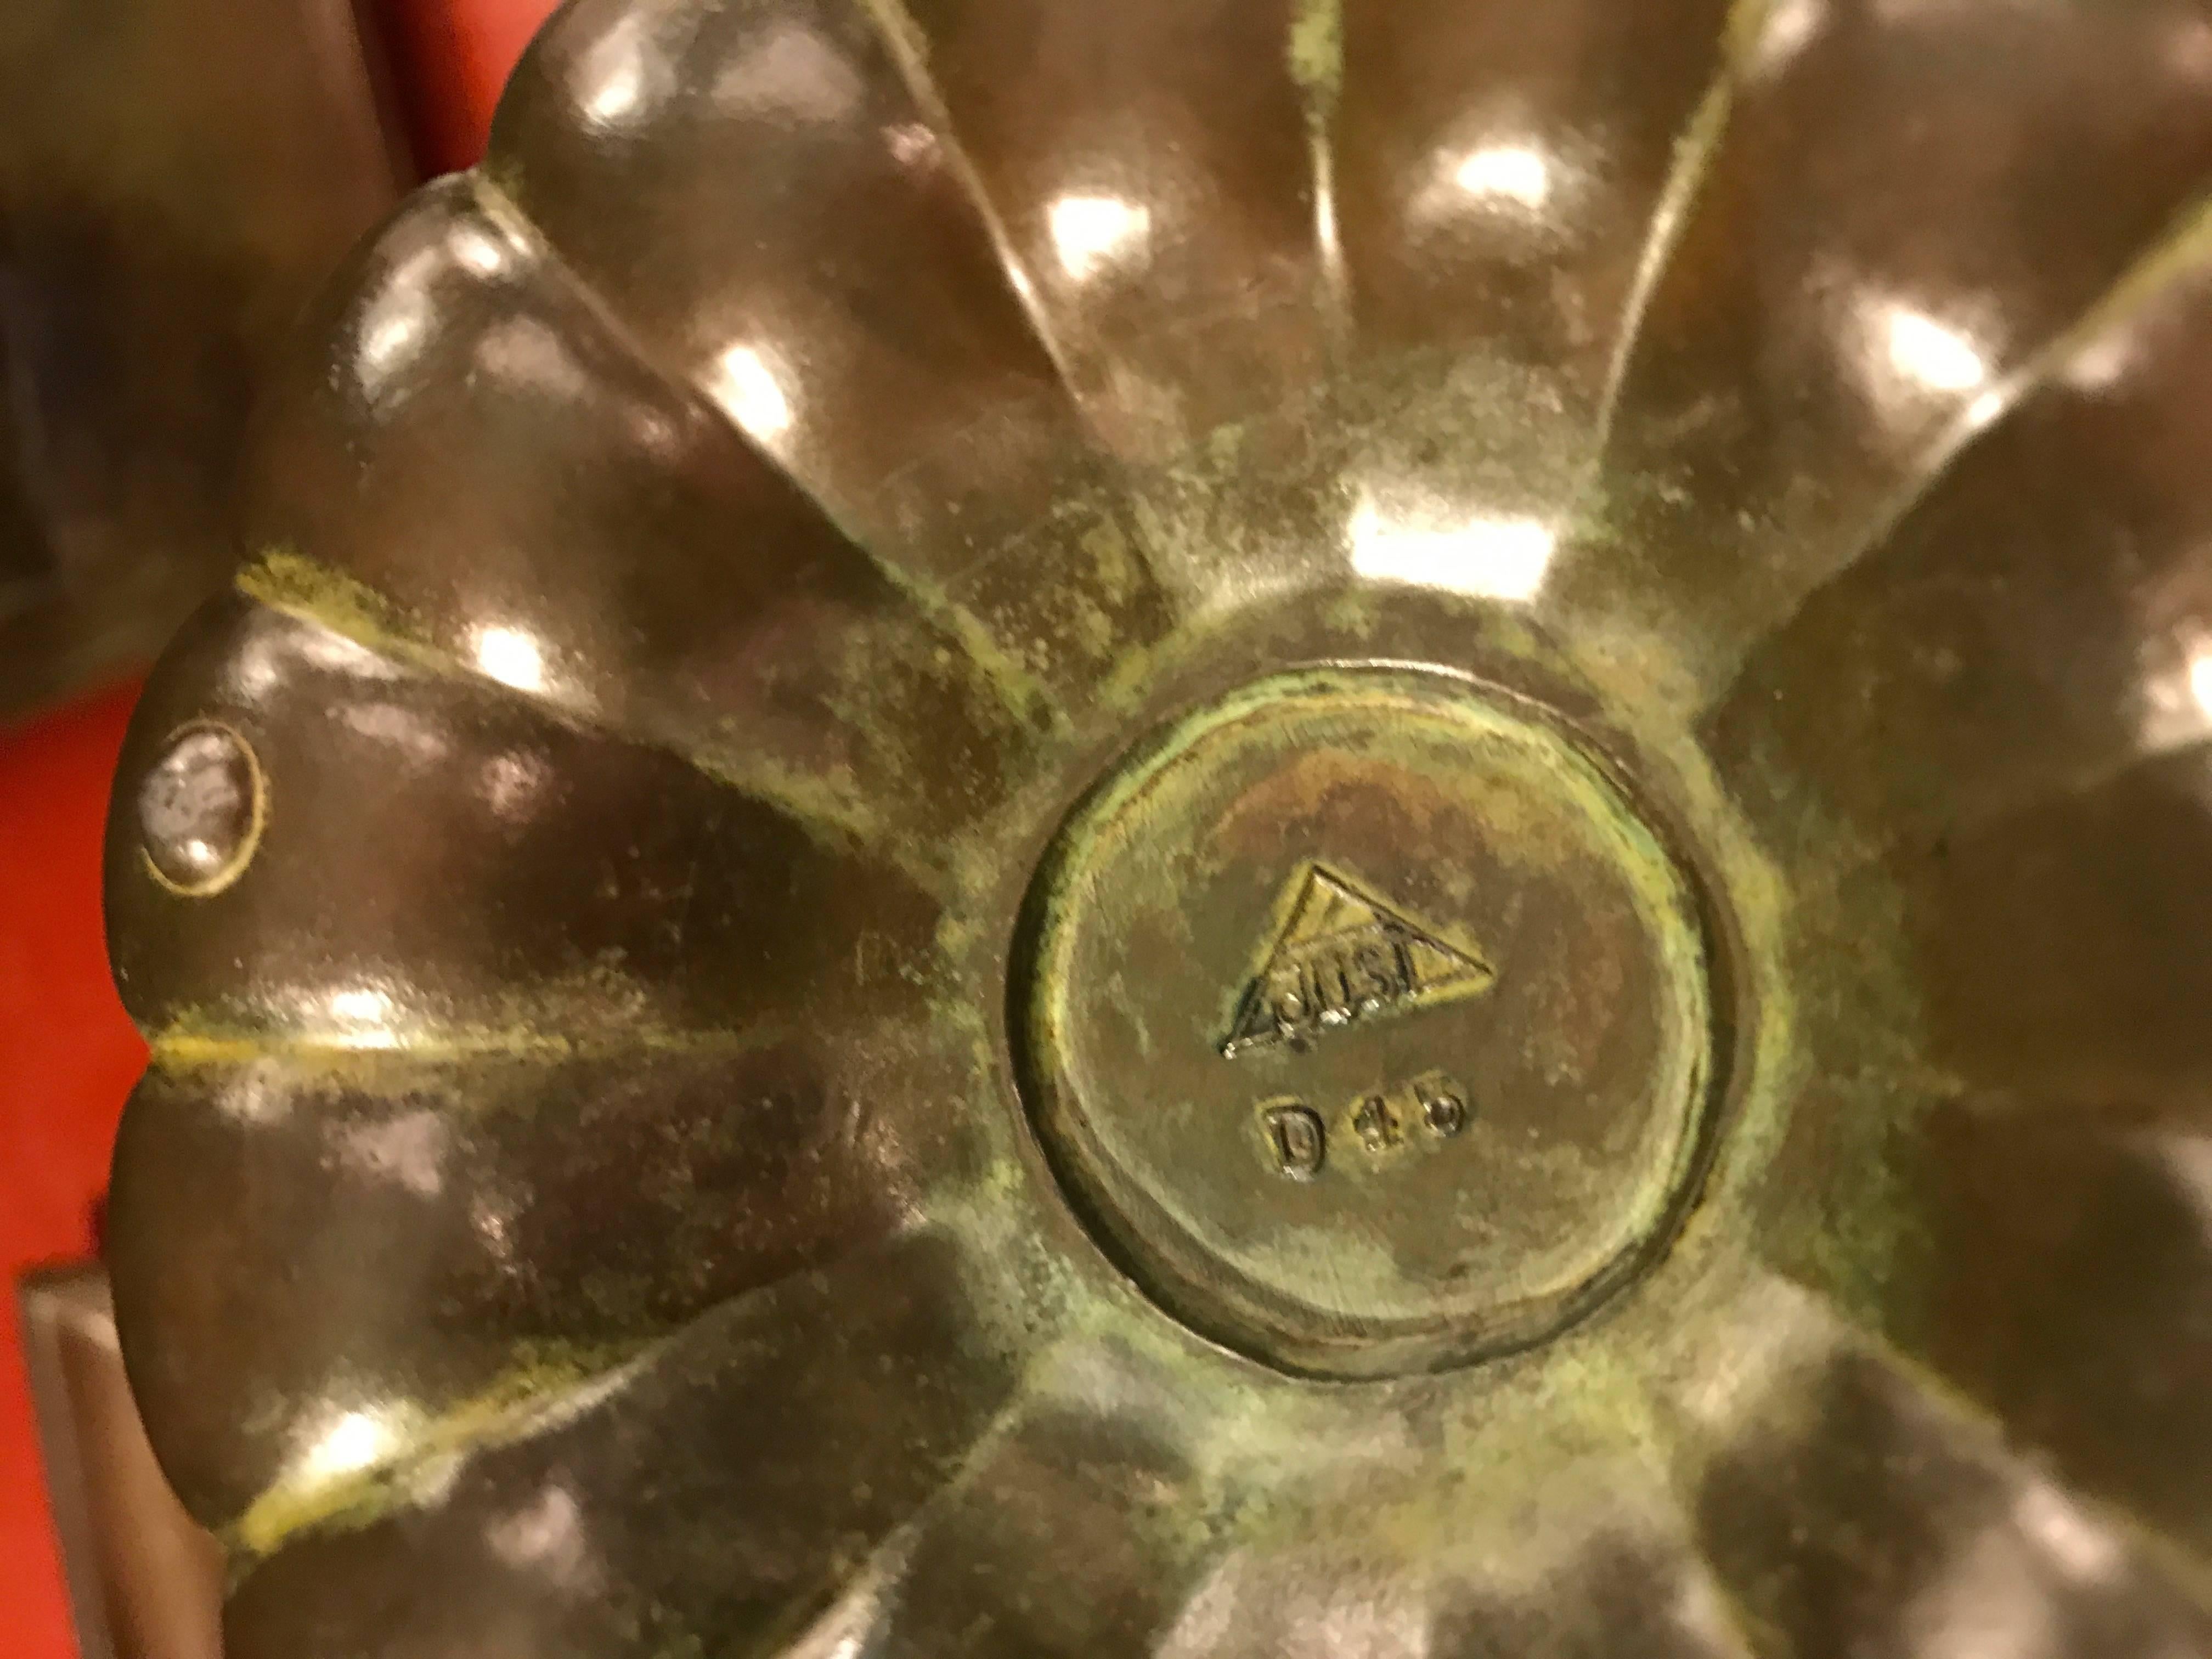 Patinated diskometal, Andersen’s signature alloy, with a hinged cap, glass well, and shallow scalloped basin. Marked on the underside with Andersen’s monogram and model number.

OUR REFERENCE N6681